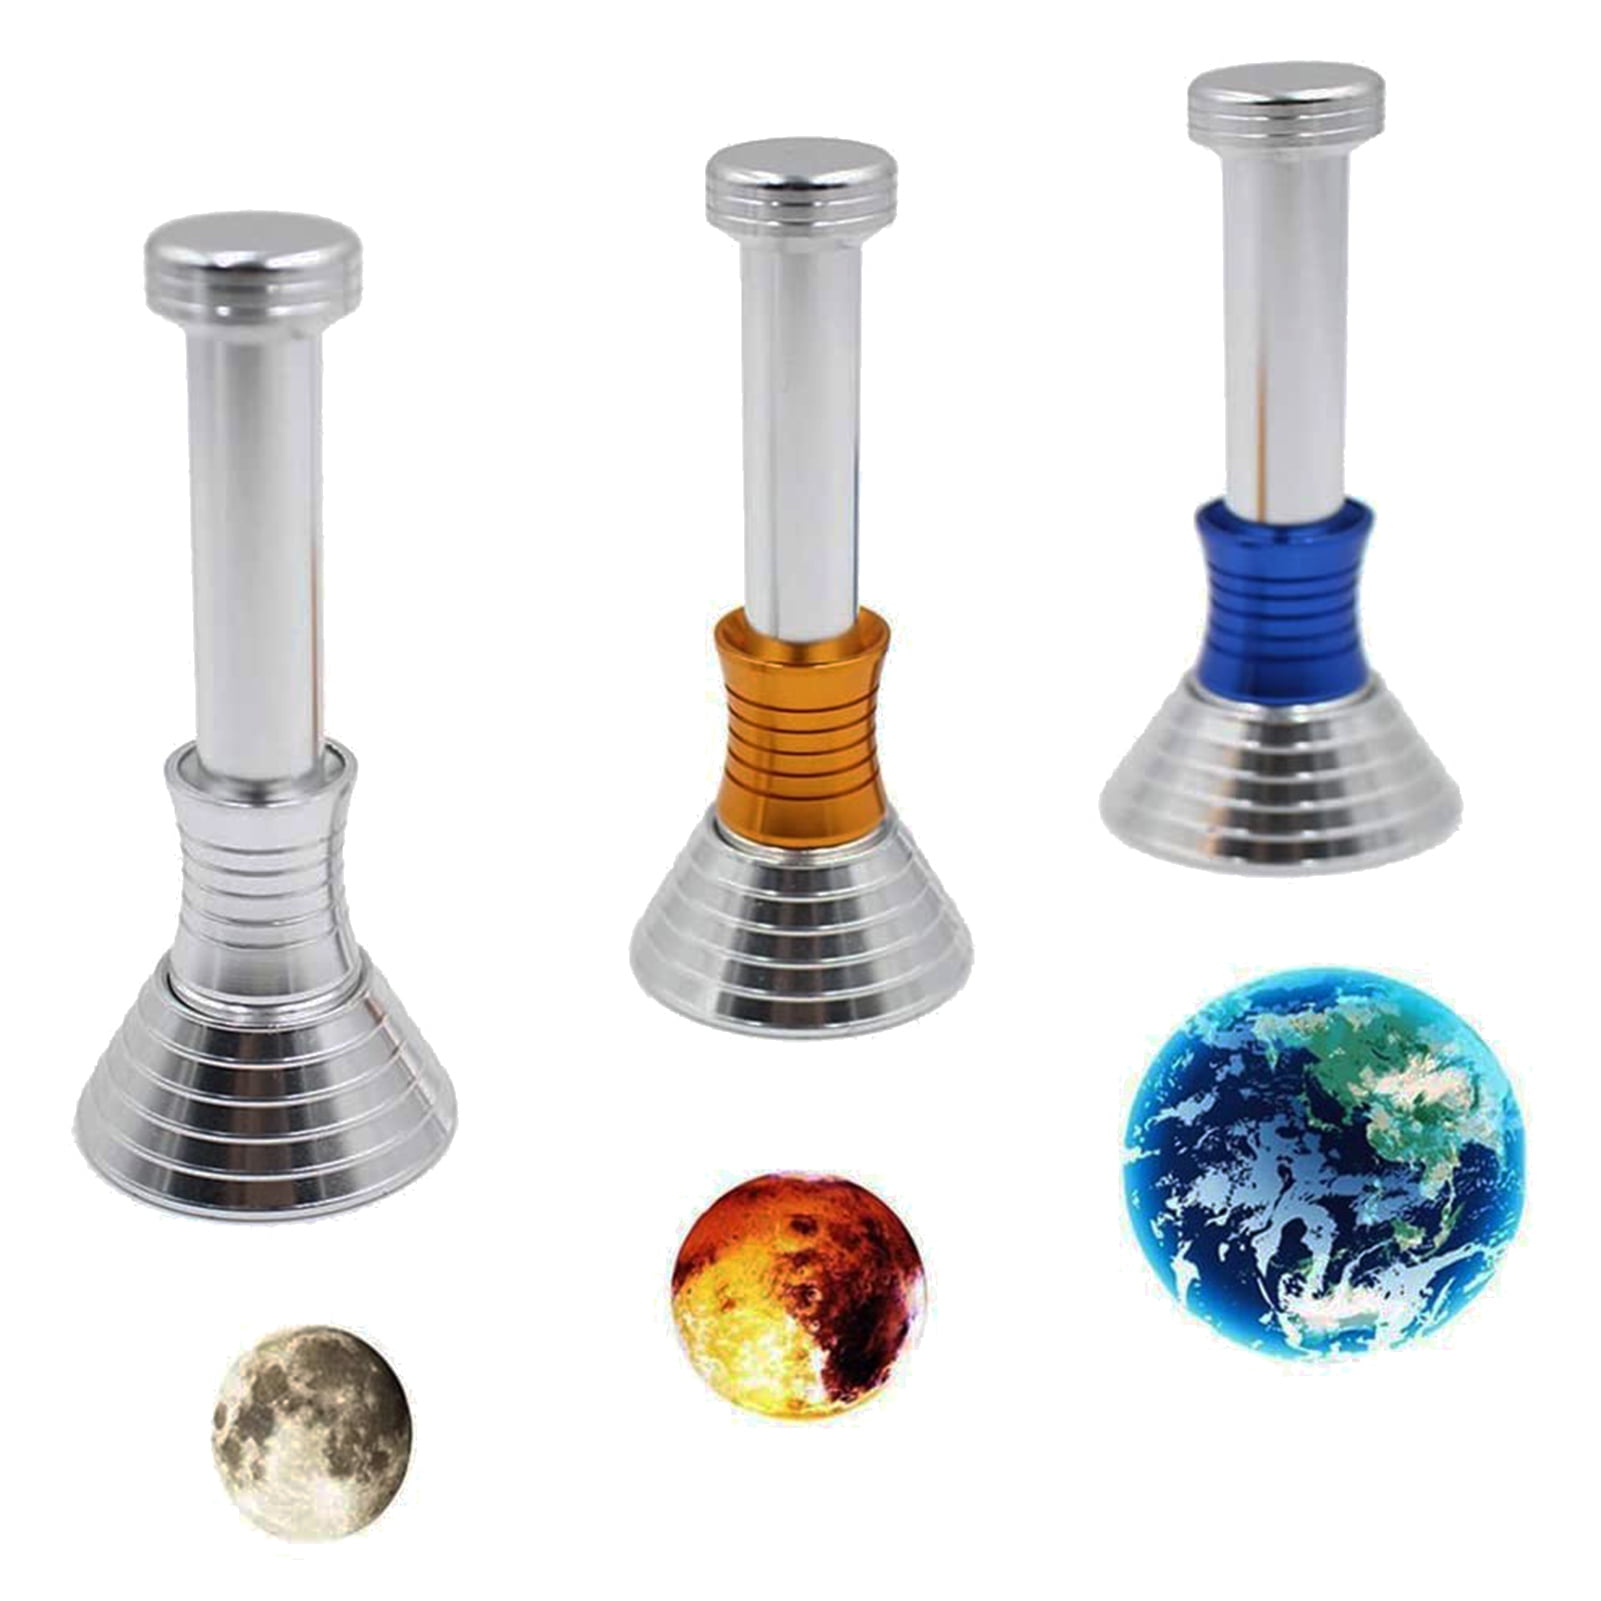 Details about   Mini Moon Drop Gravity Defying Fidget Hand Spinner Stress Relief DIY Desk Toy 